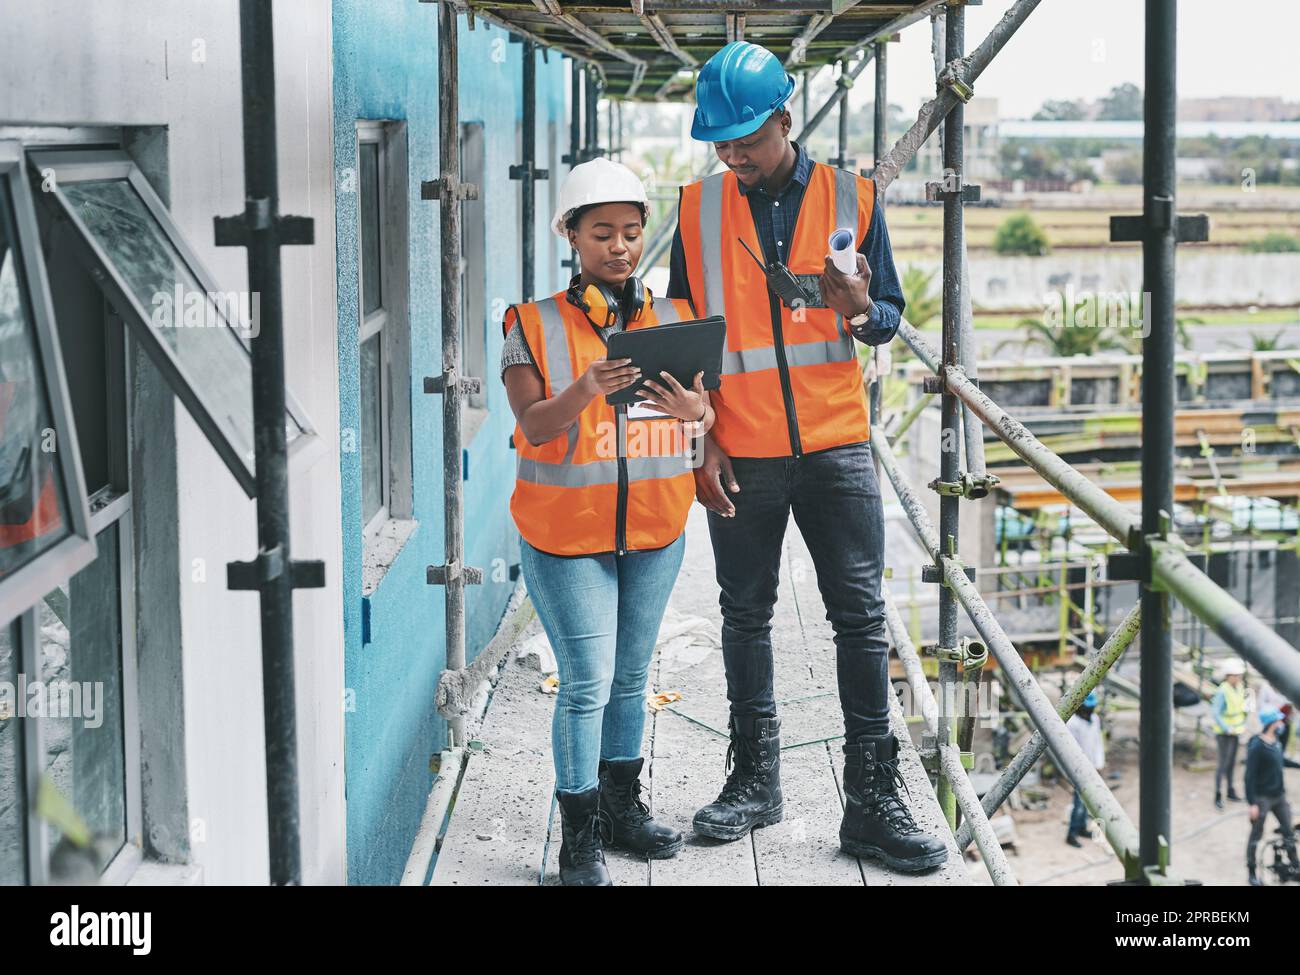 Cloud technology keeps all your data secure and accessible. a young man and woman using a digital tablet while working at a construction site. Stock Photo